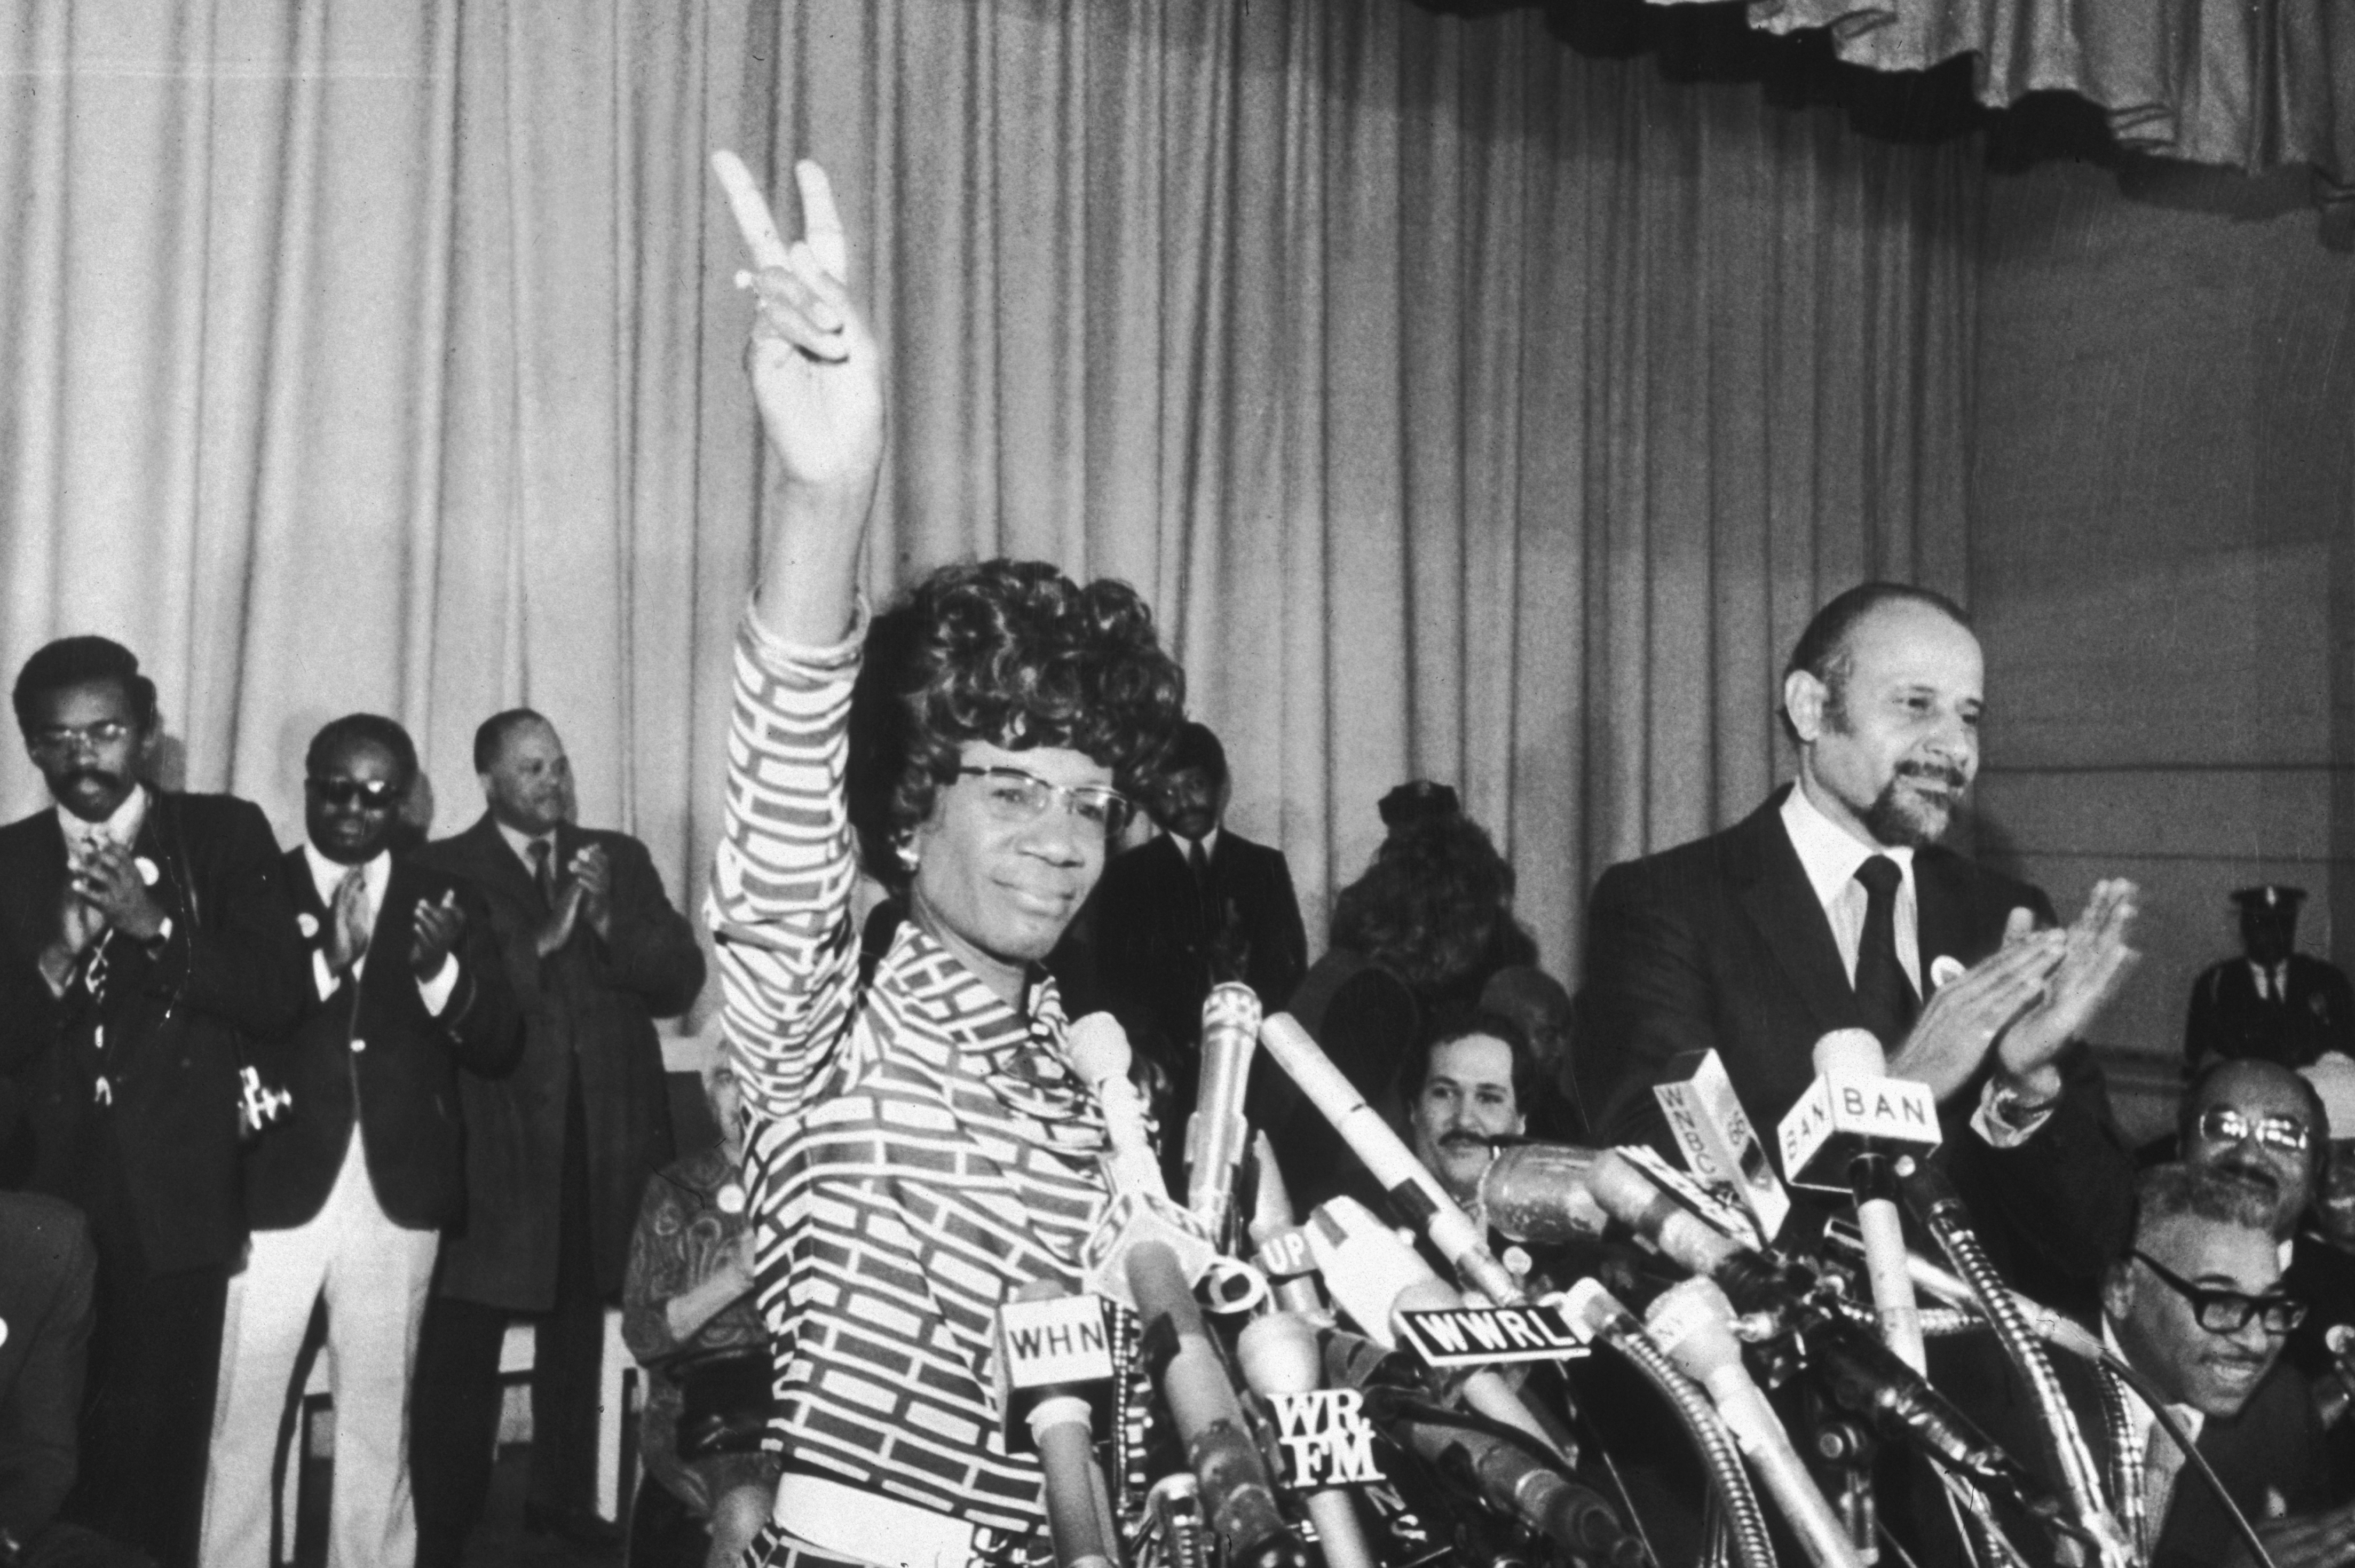 U.S. Rep. Shirley Chisholm announces her entry for the Democratic nomination for the presidency, at the Concord Baptist Church in Brooklyn, New York on Jan. 25, 1972. (Don Hogan Charles—New York Times Co./Getty Images)